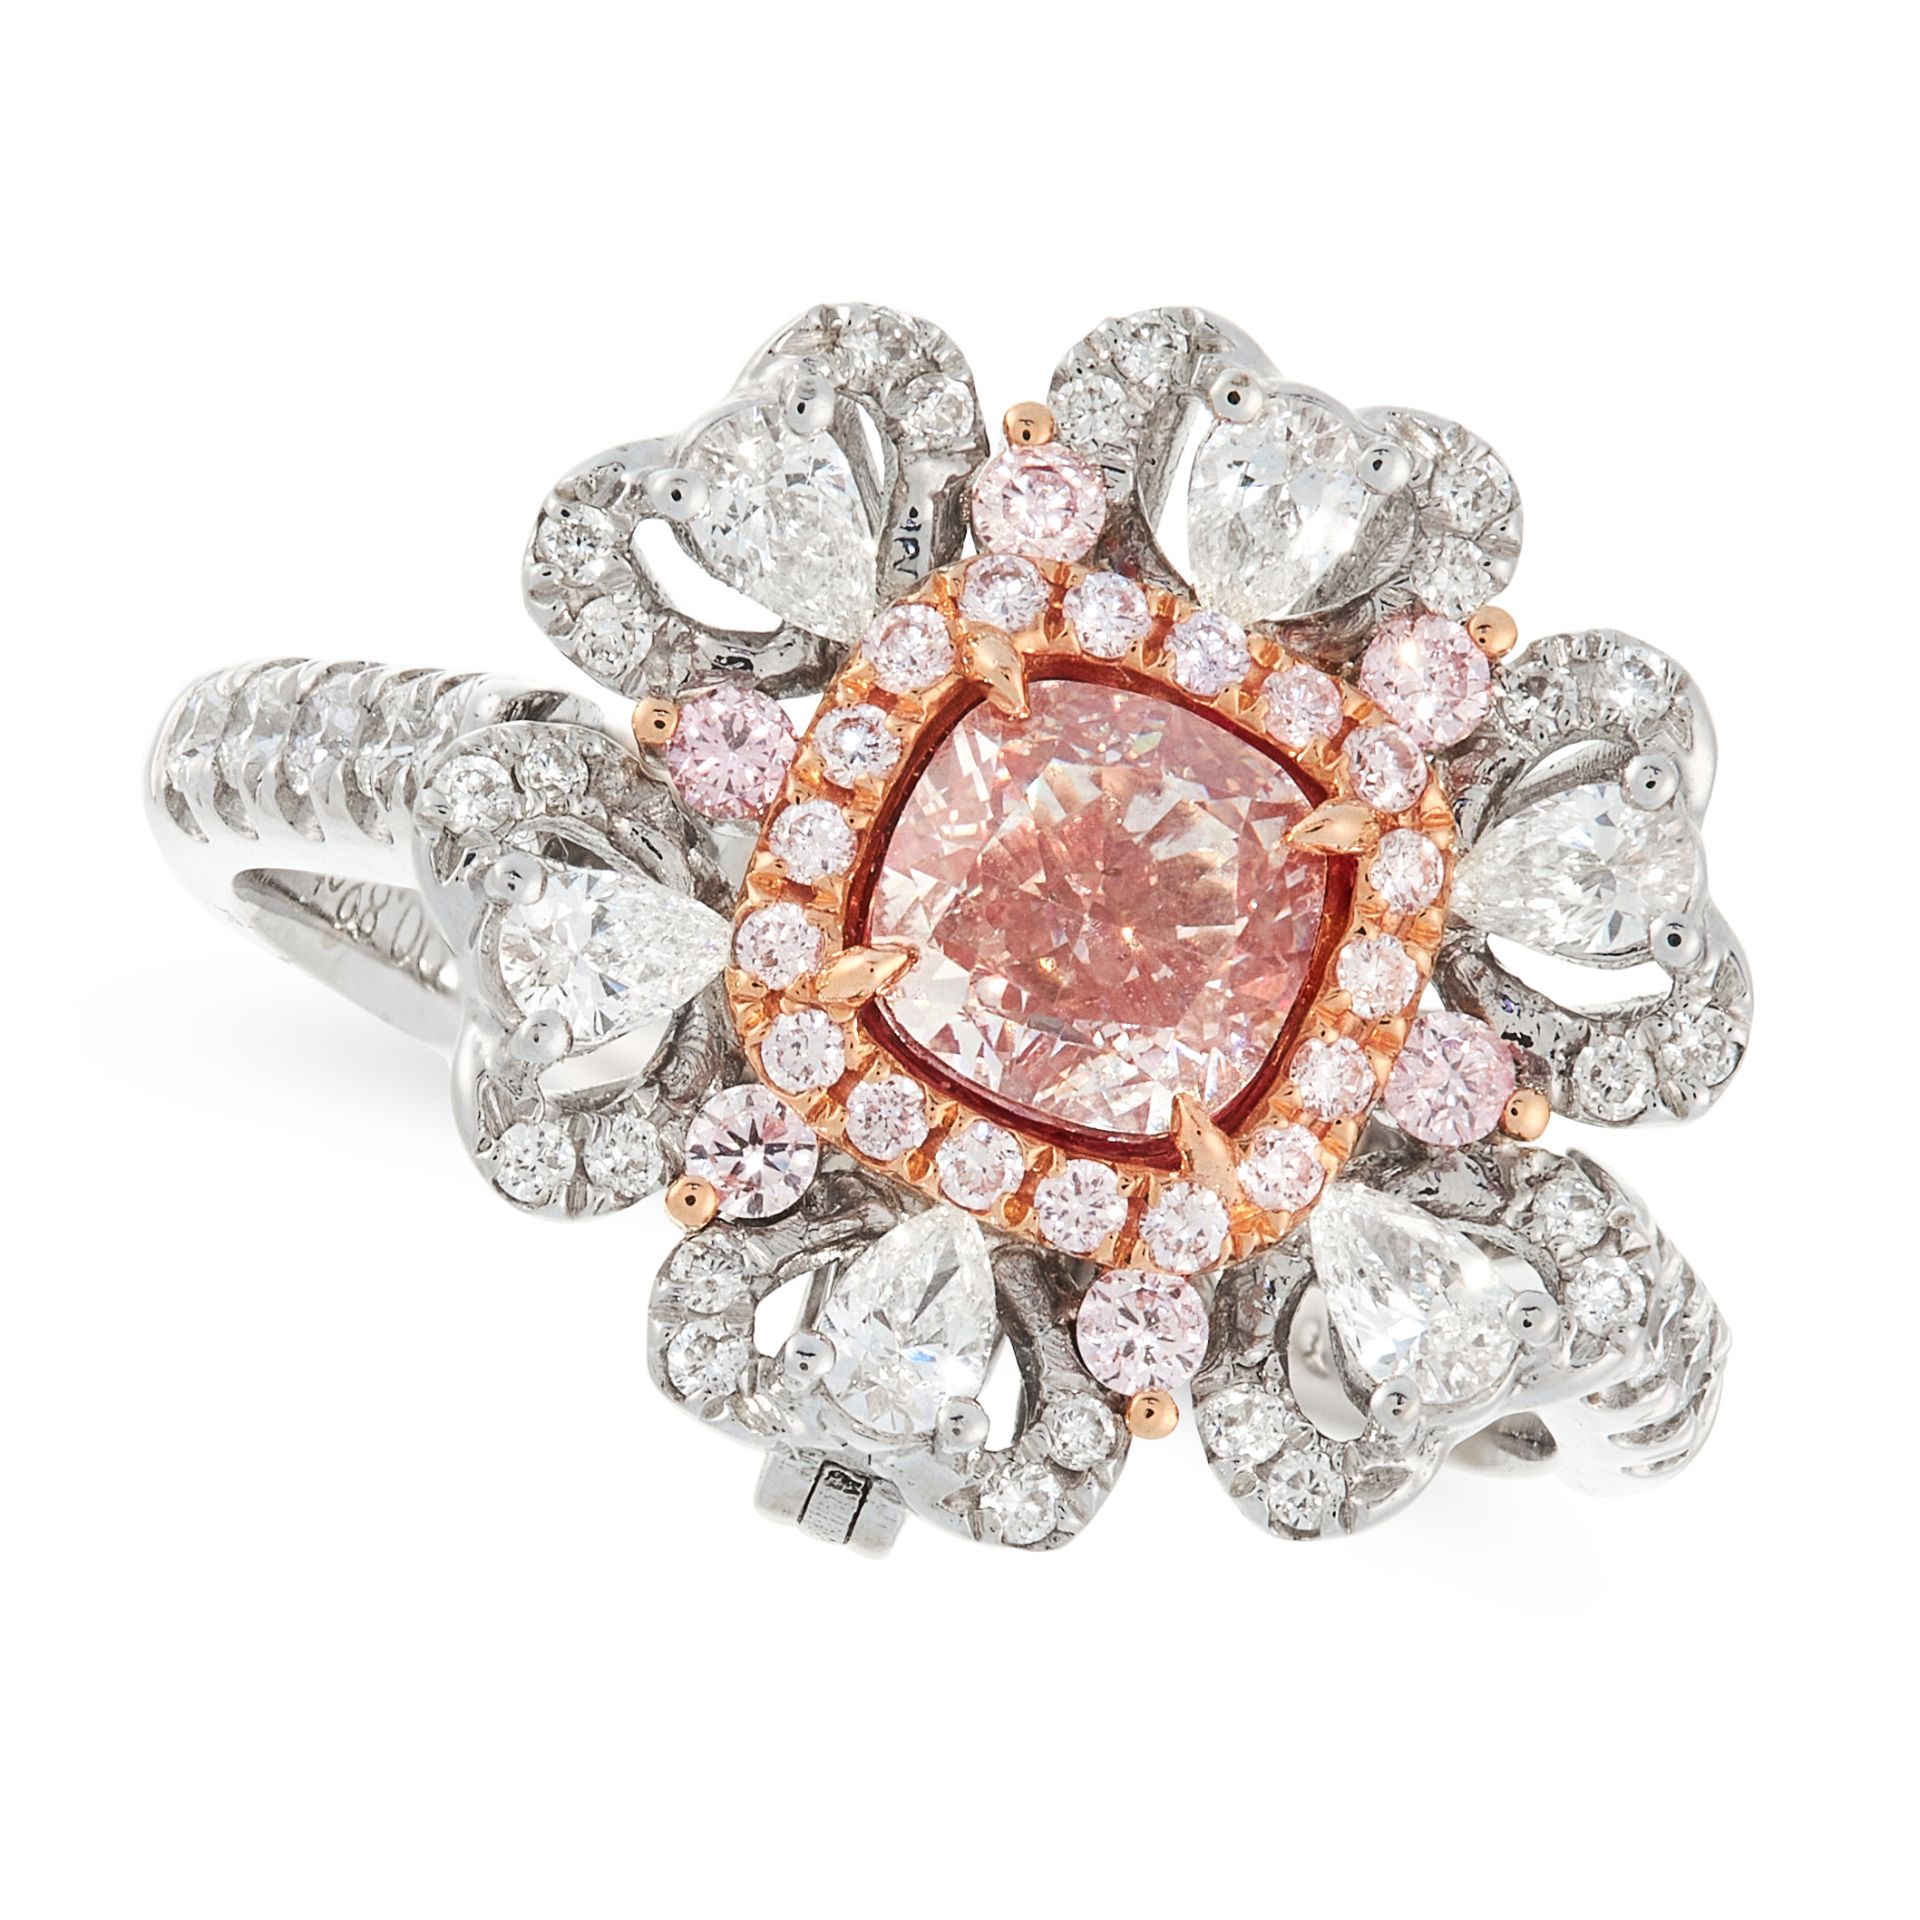 A PINK DIAMOND AND WHITE DIAMOND DRESS RING / PENDANT in 18ct gold, set with a cushion cut fancy